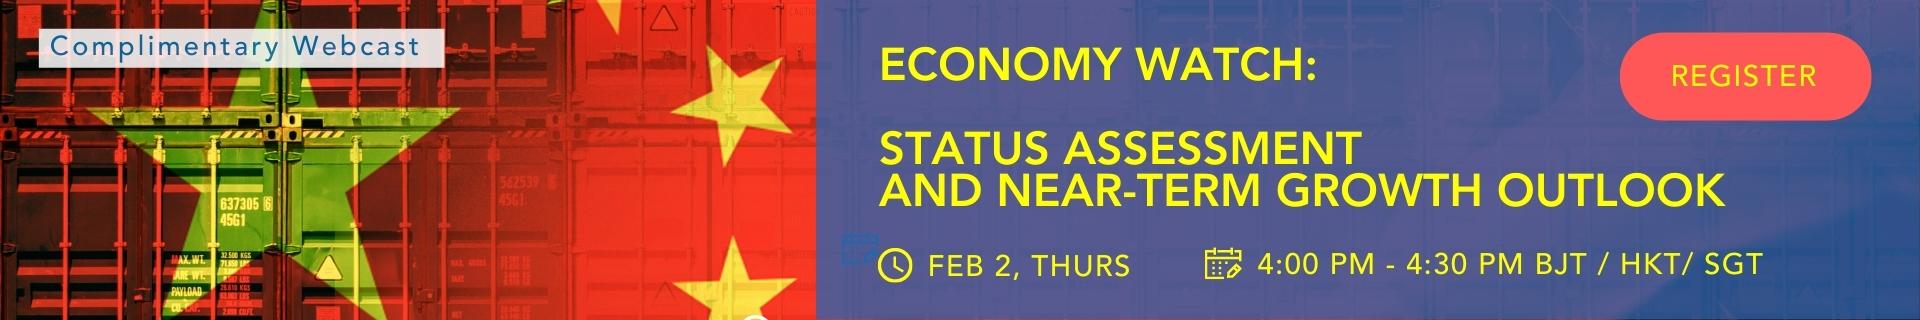 Economy Watch: Status Assessment and Near-term Growth Outloo